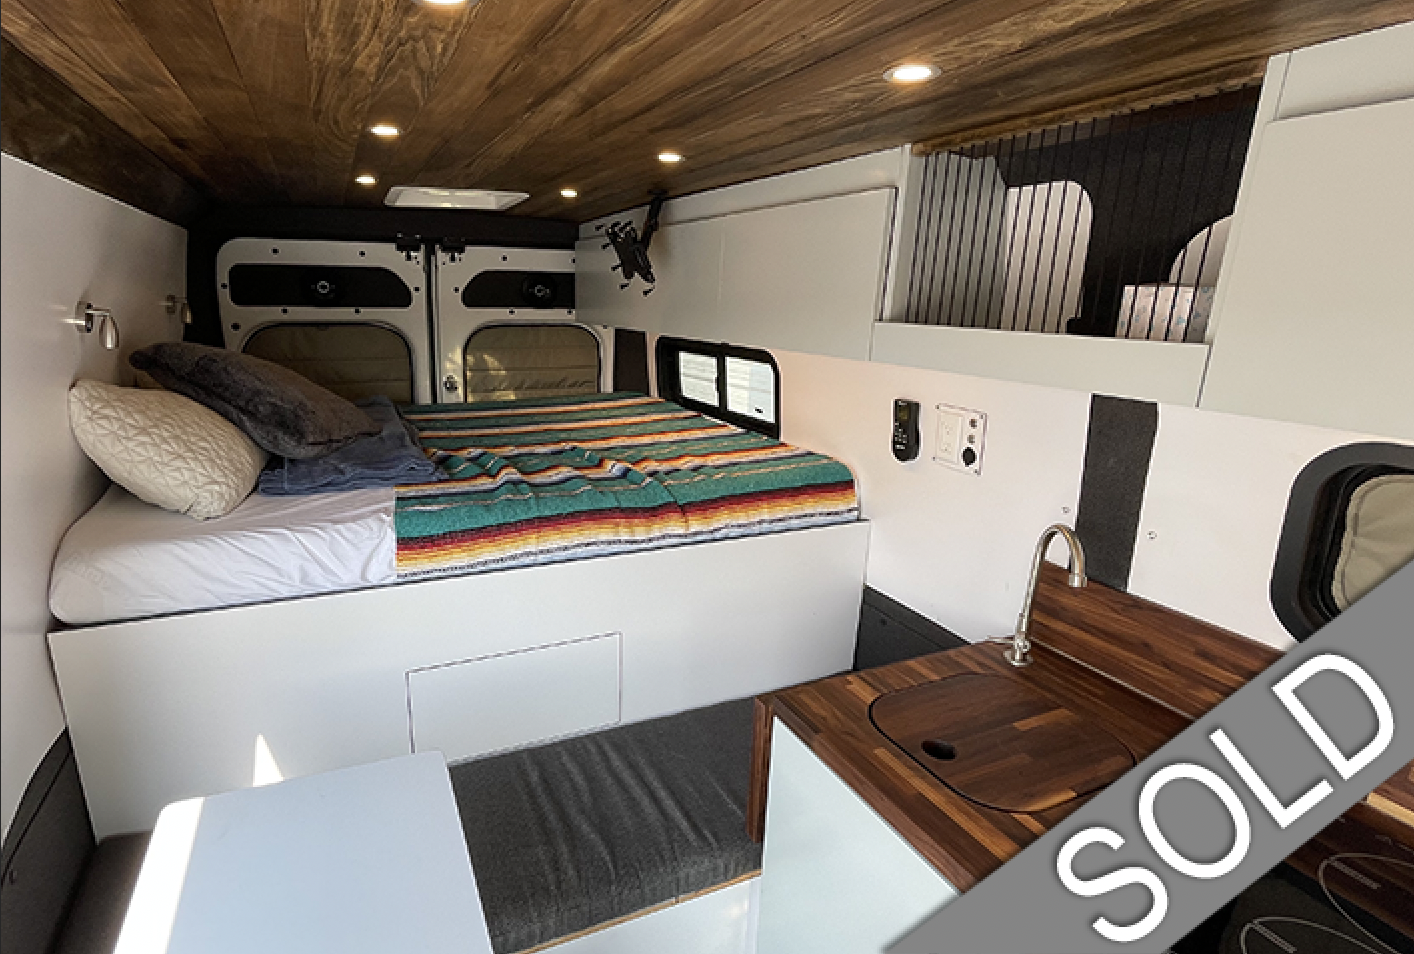 SOLD // 2019 ProMaster 159" // $95,000